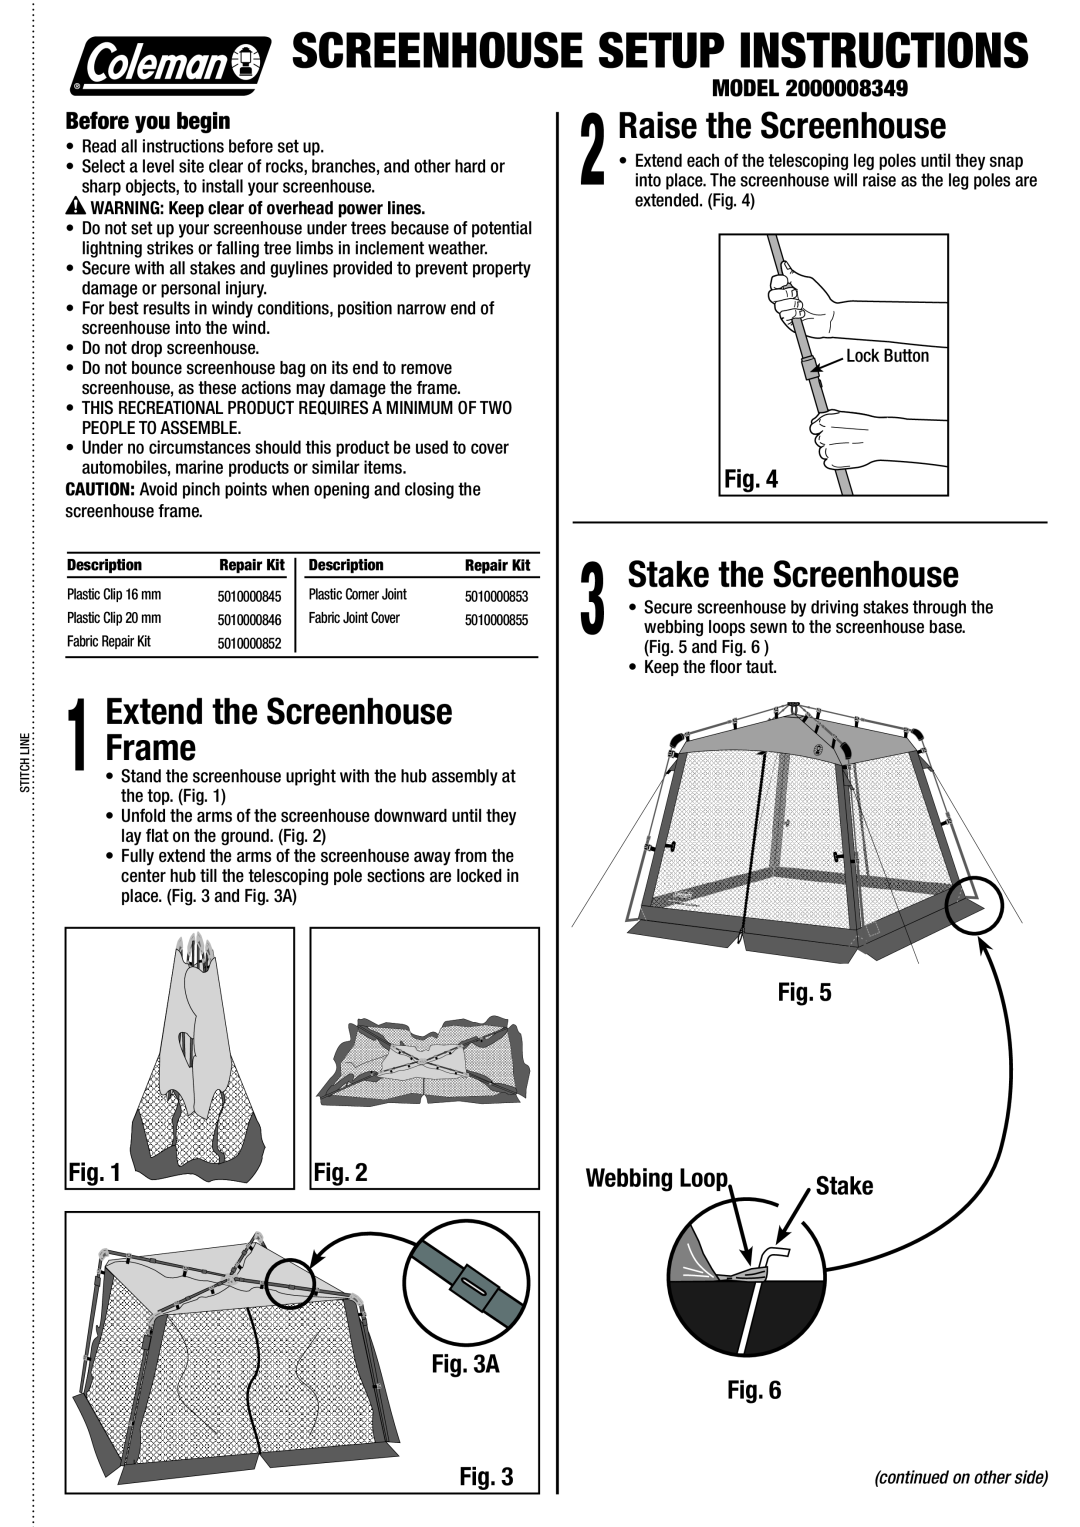 Coleman 2000008349 manual Raise the Screenhouse, Webbing Loop, Stake, A, Before you begin, SCREENHOUSE setup INStructions 